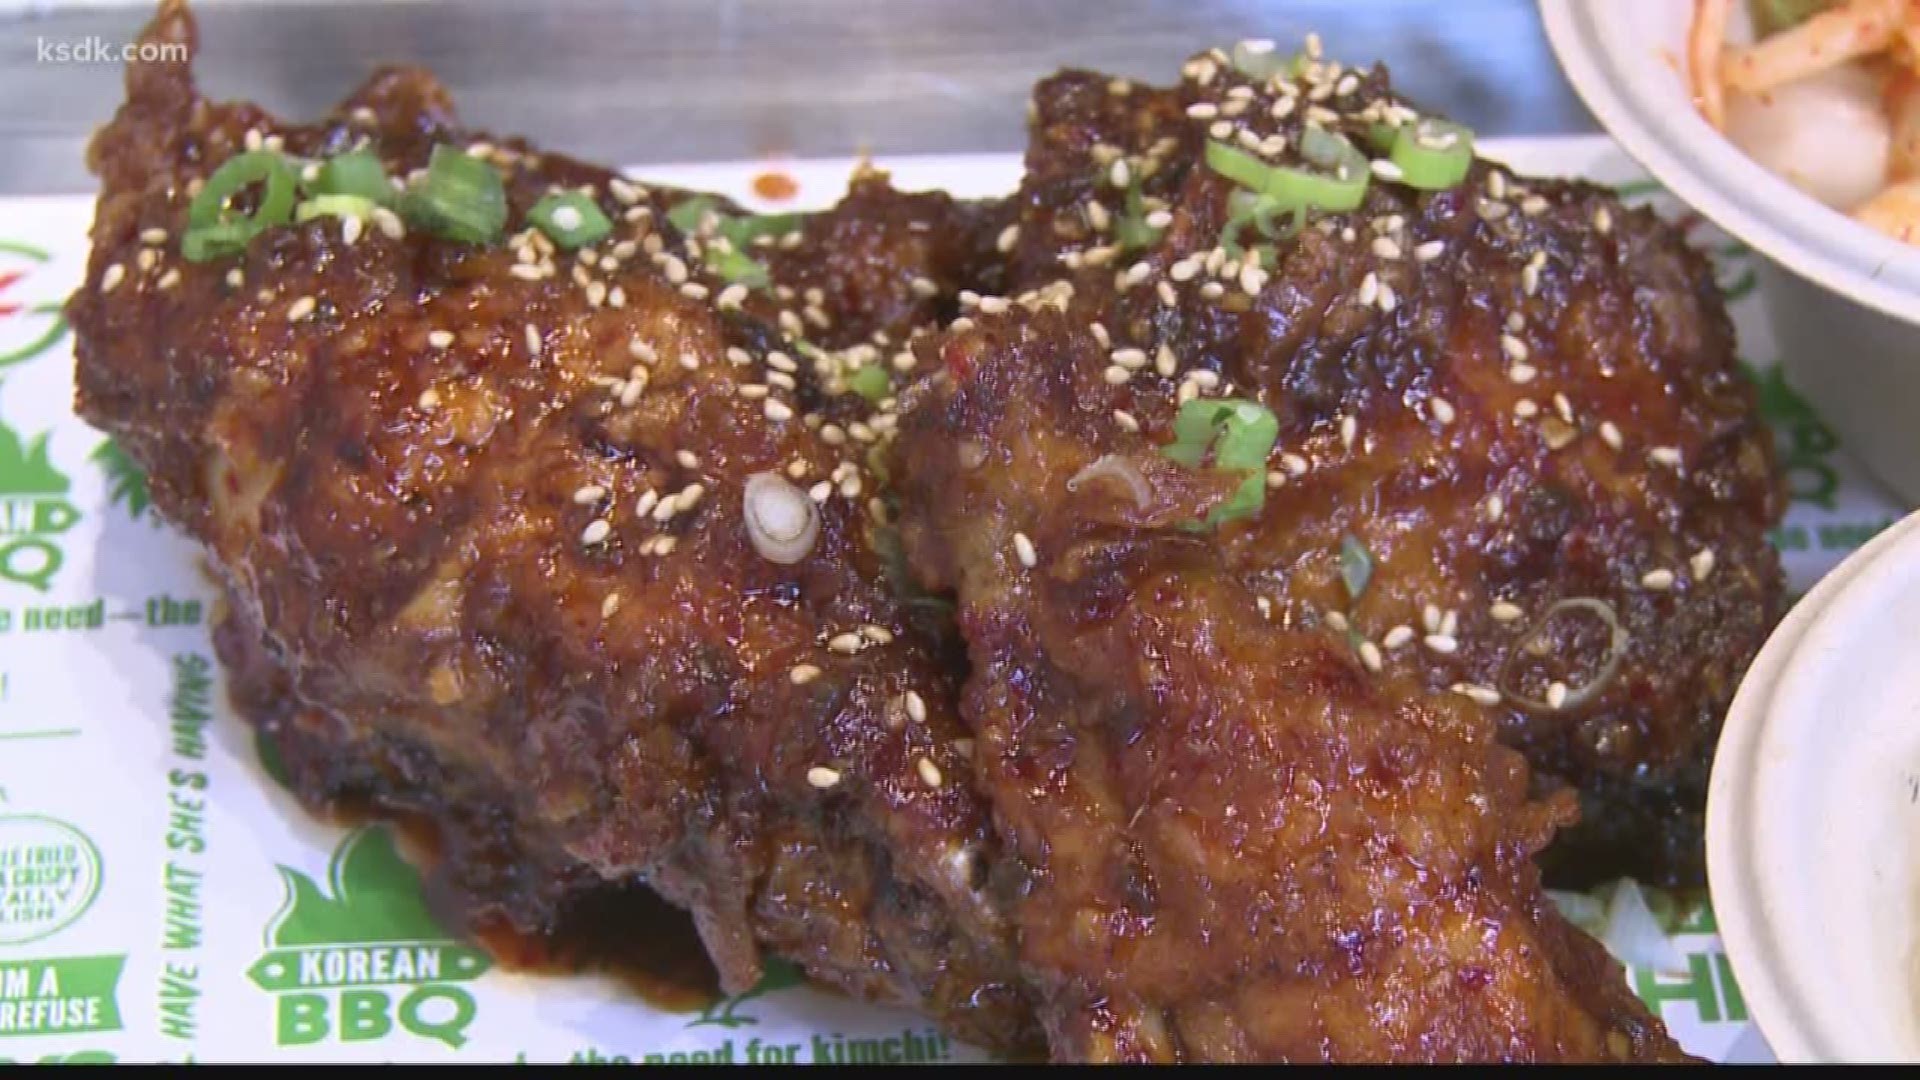 Kimchi Guys is the first and only Korean fried chicken restaurant in St. Louis.